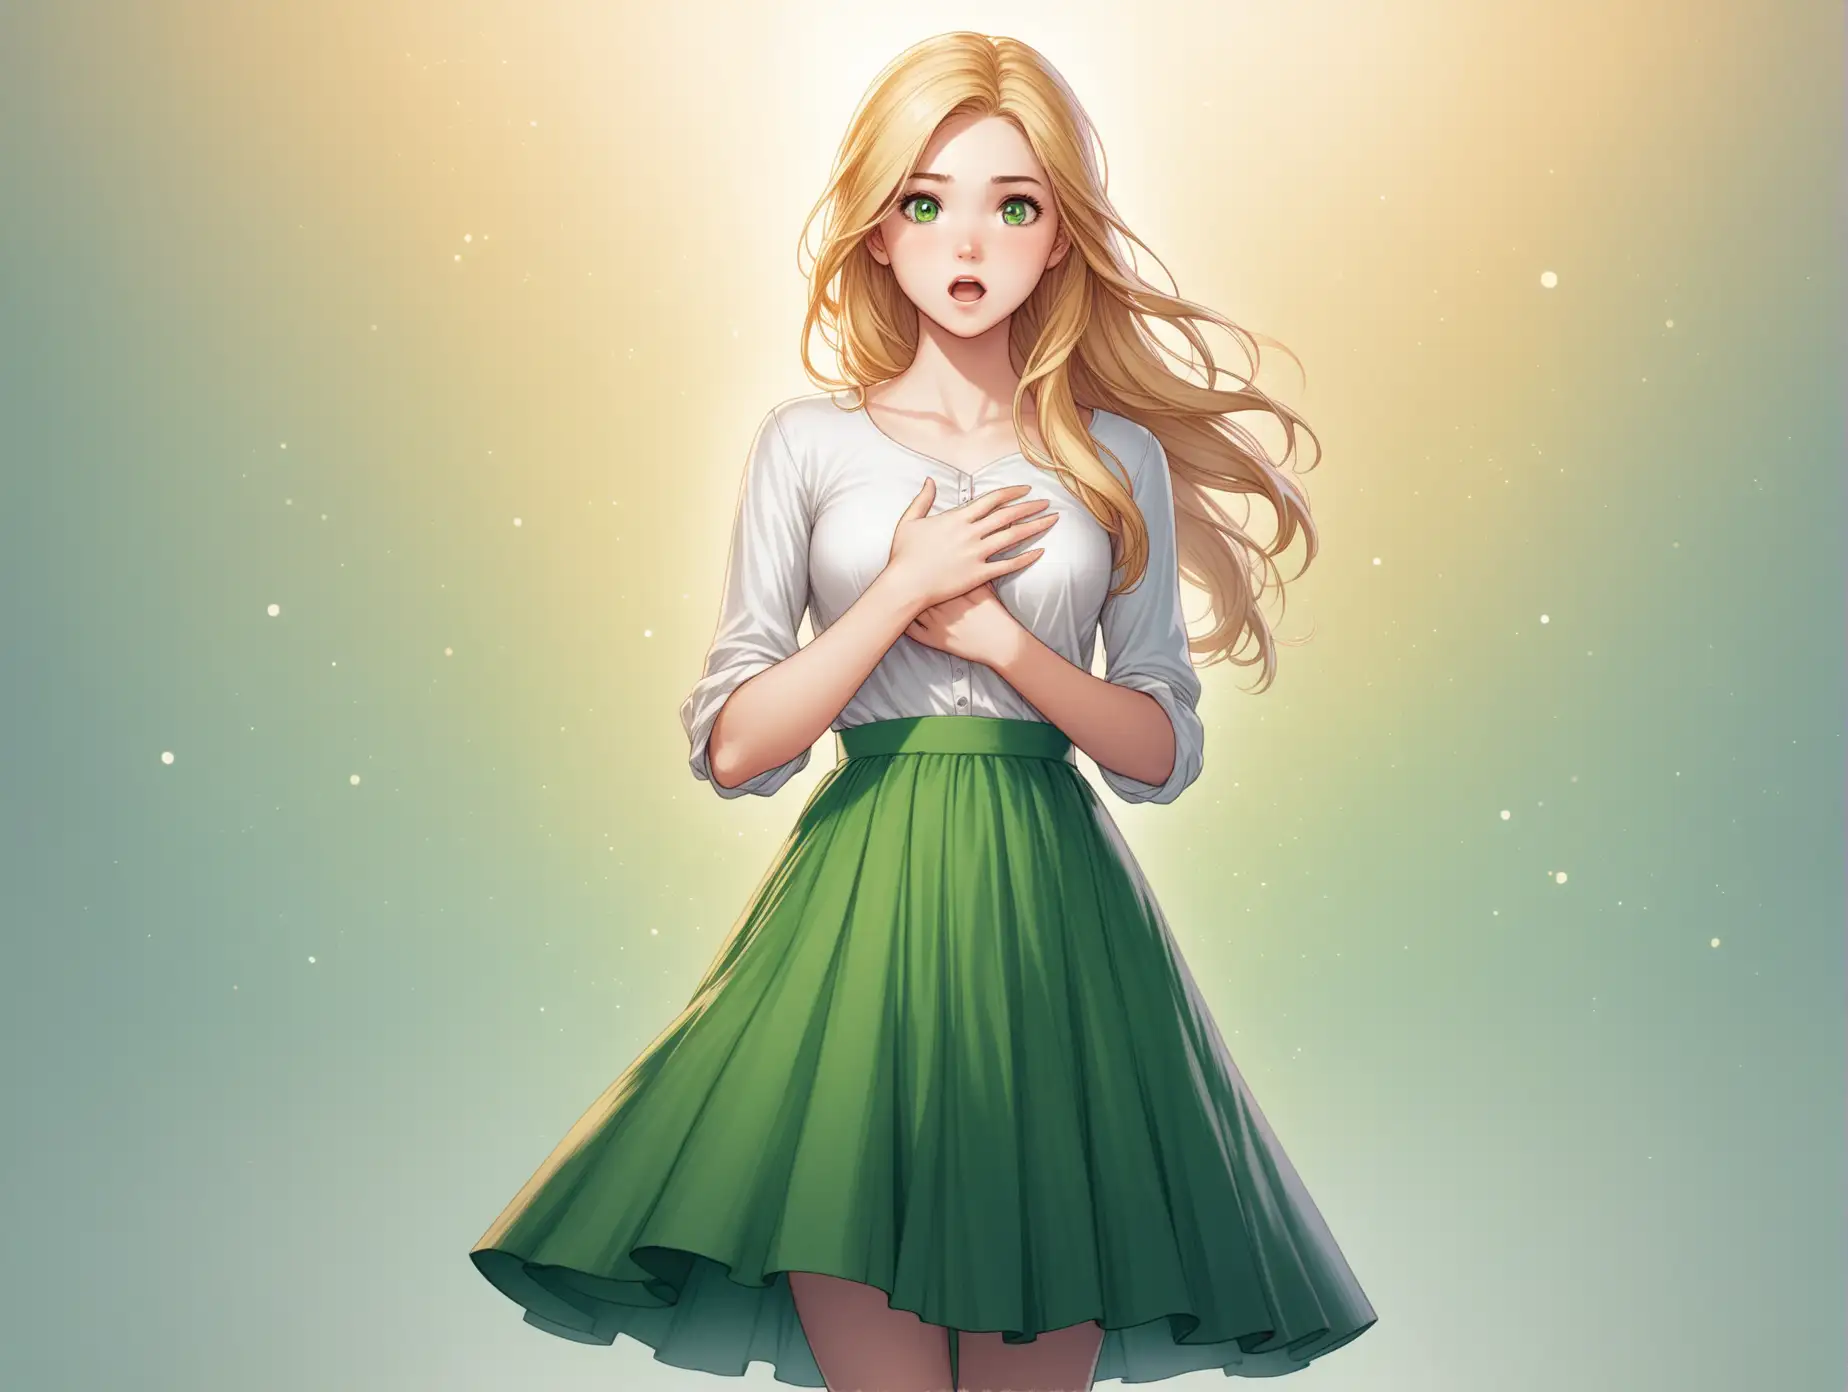 Surprised-Blonde-Girl-in-Fantasy-Style-by-Charlie-Bowater